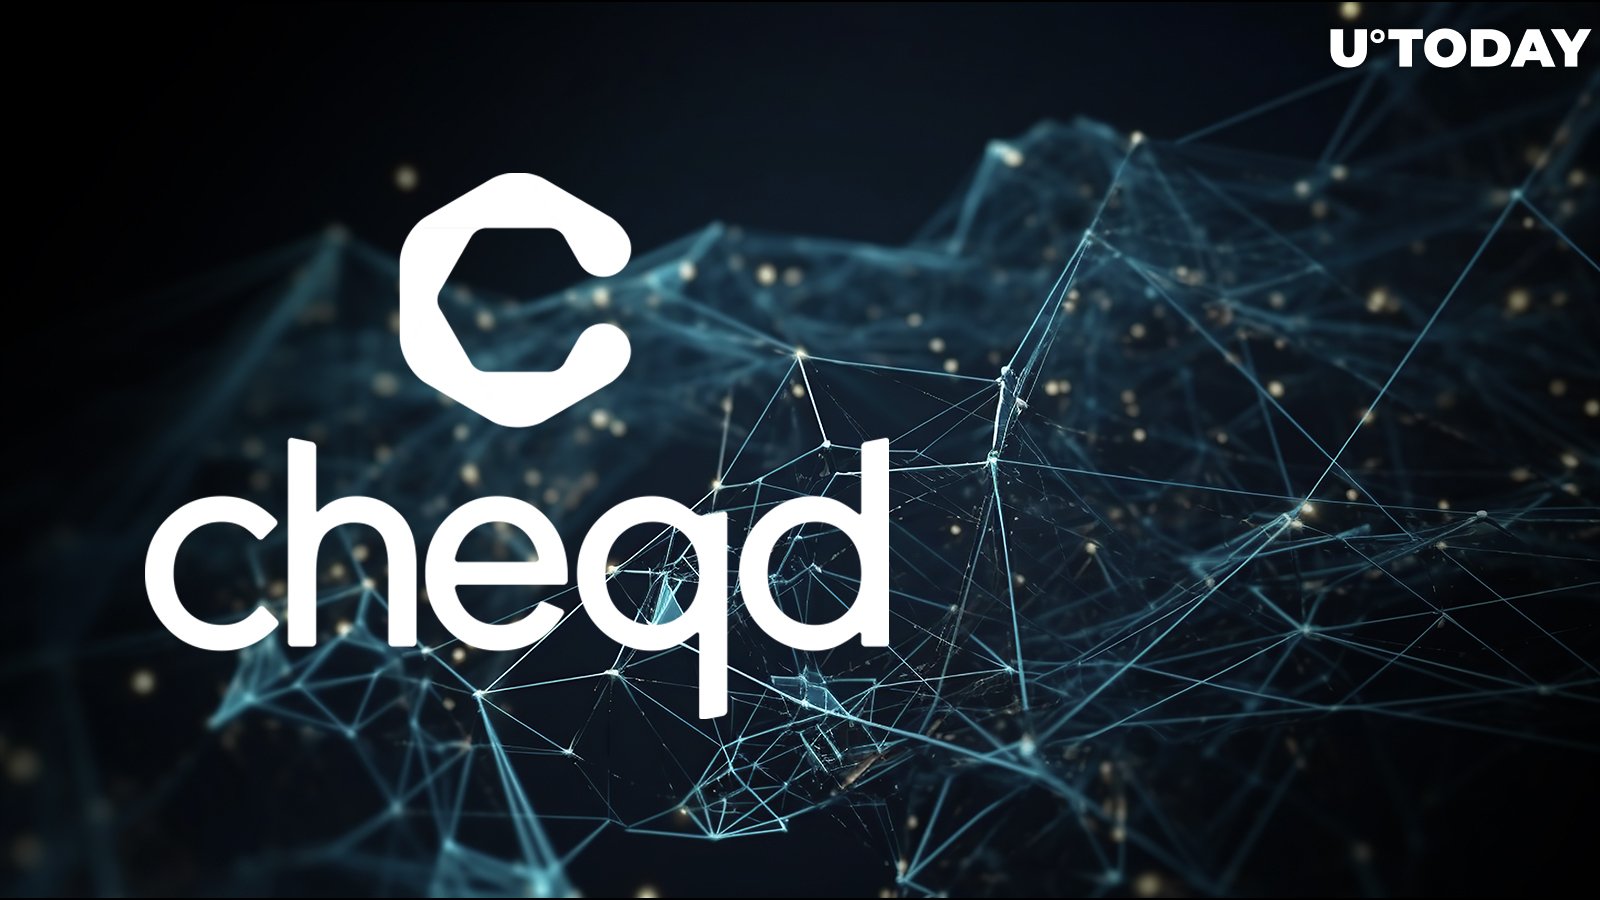 Creds Launched by cheqd: Secure and Privacy-Preserving Platform to Bolster Trust in Web3